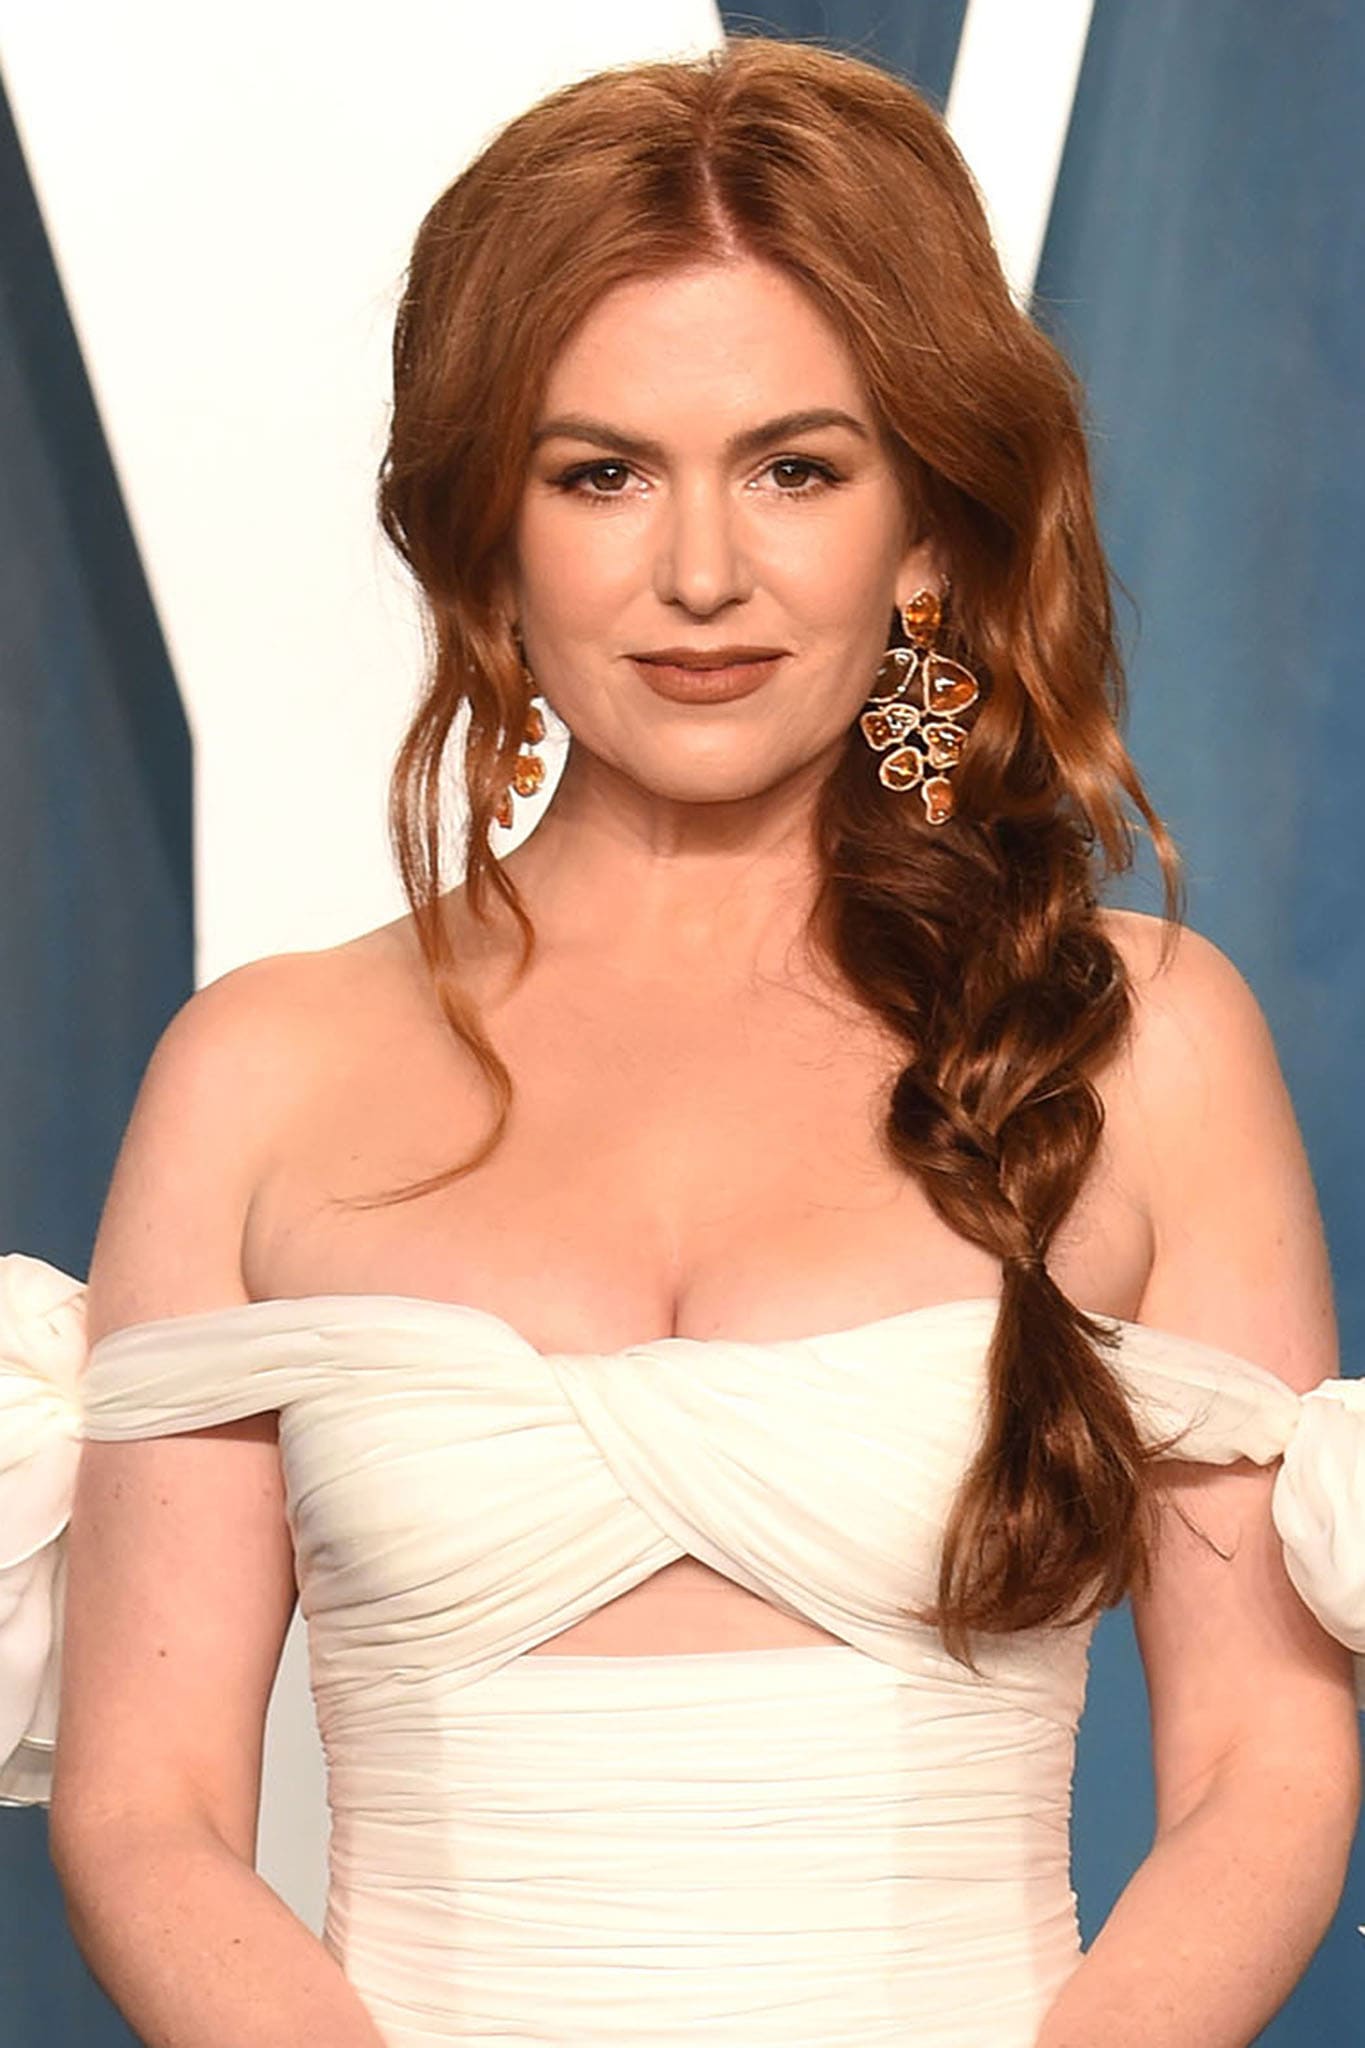 Isla Fisher wears nude makeup and styles her hair in a loose fishtail braid